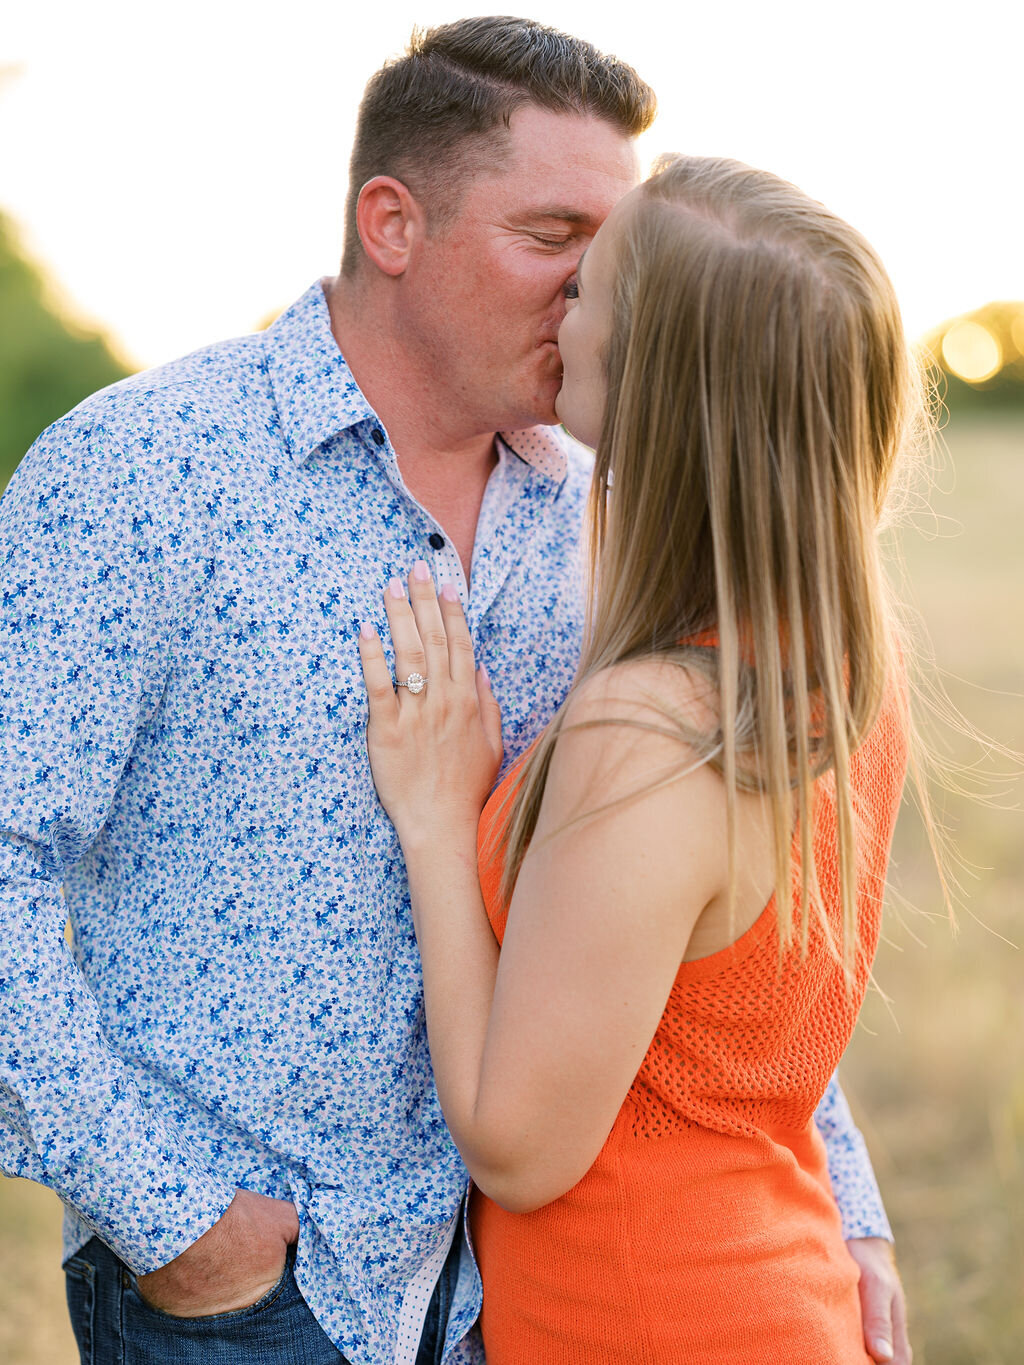 Engagement portraits on family ranch7